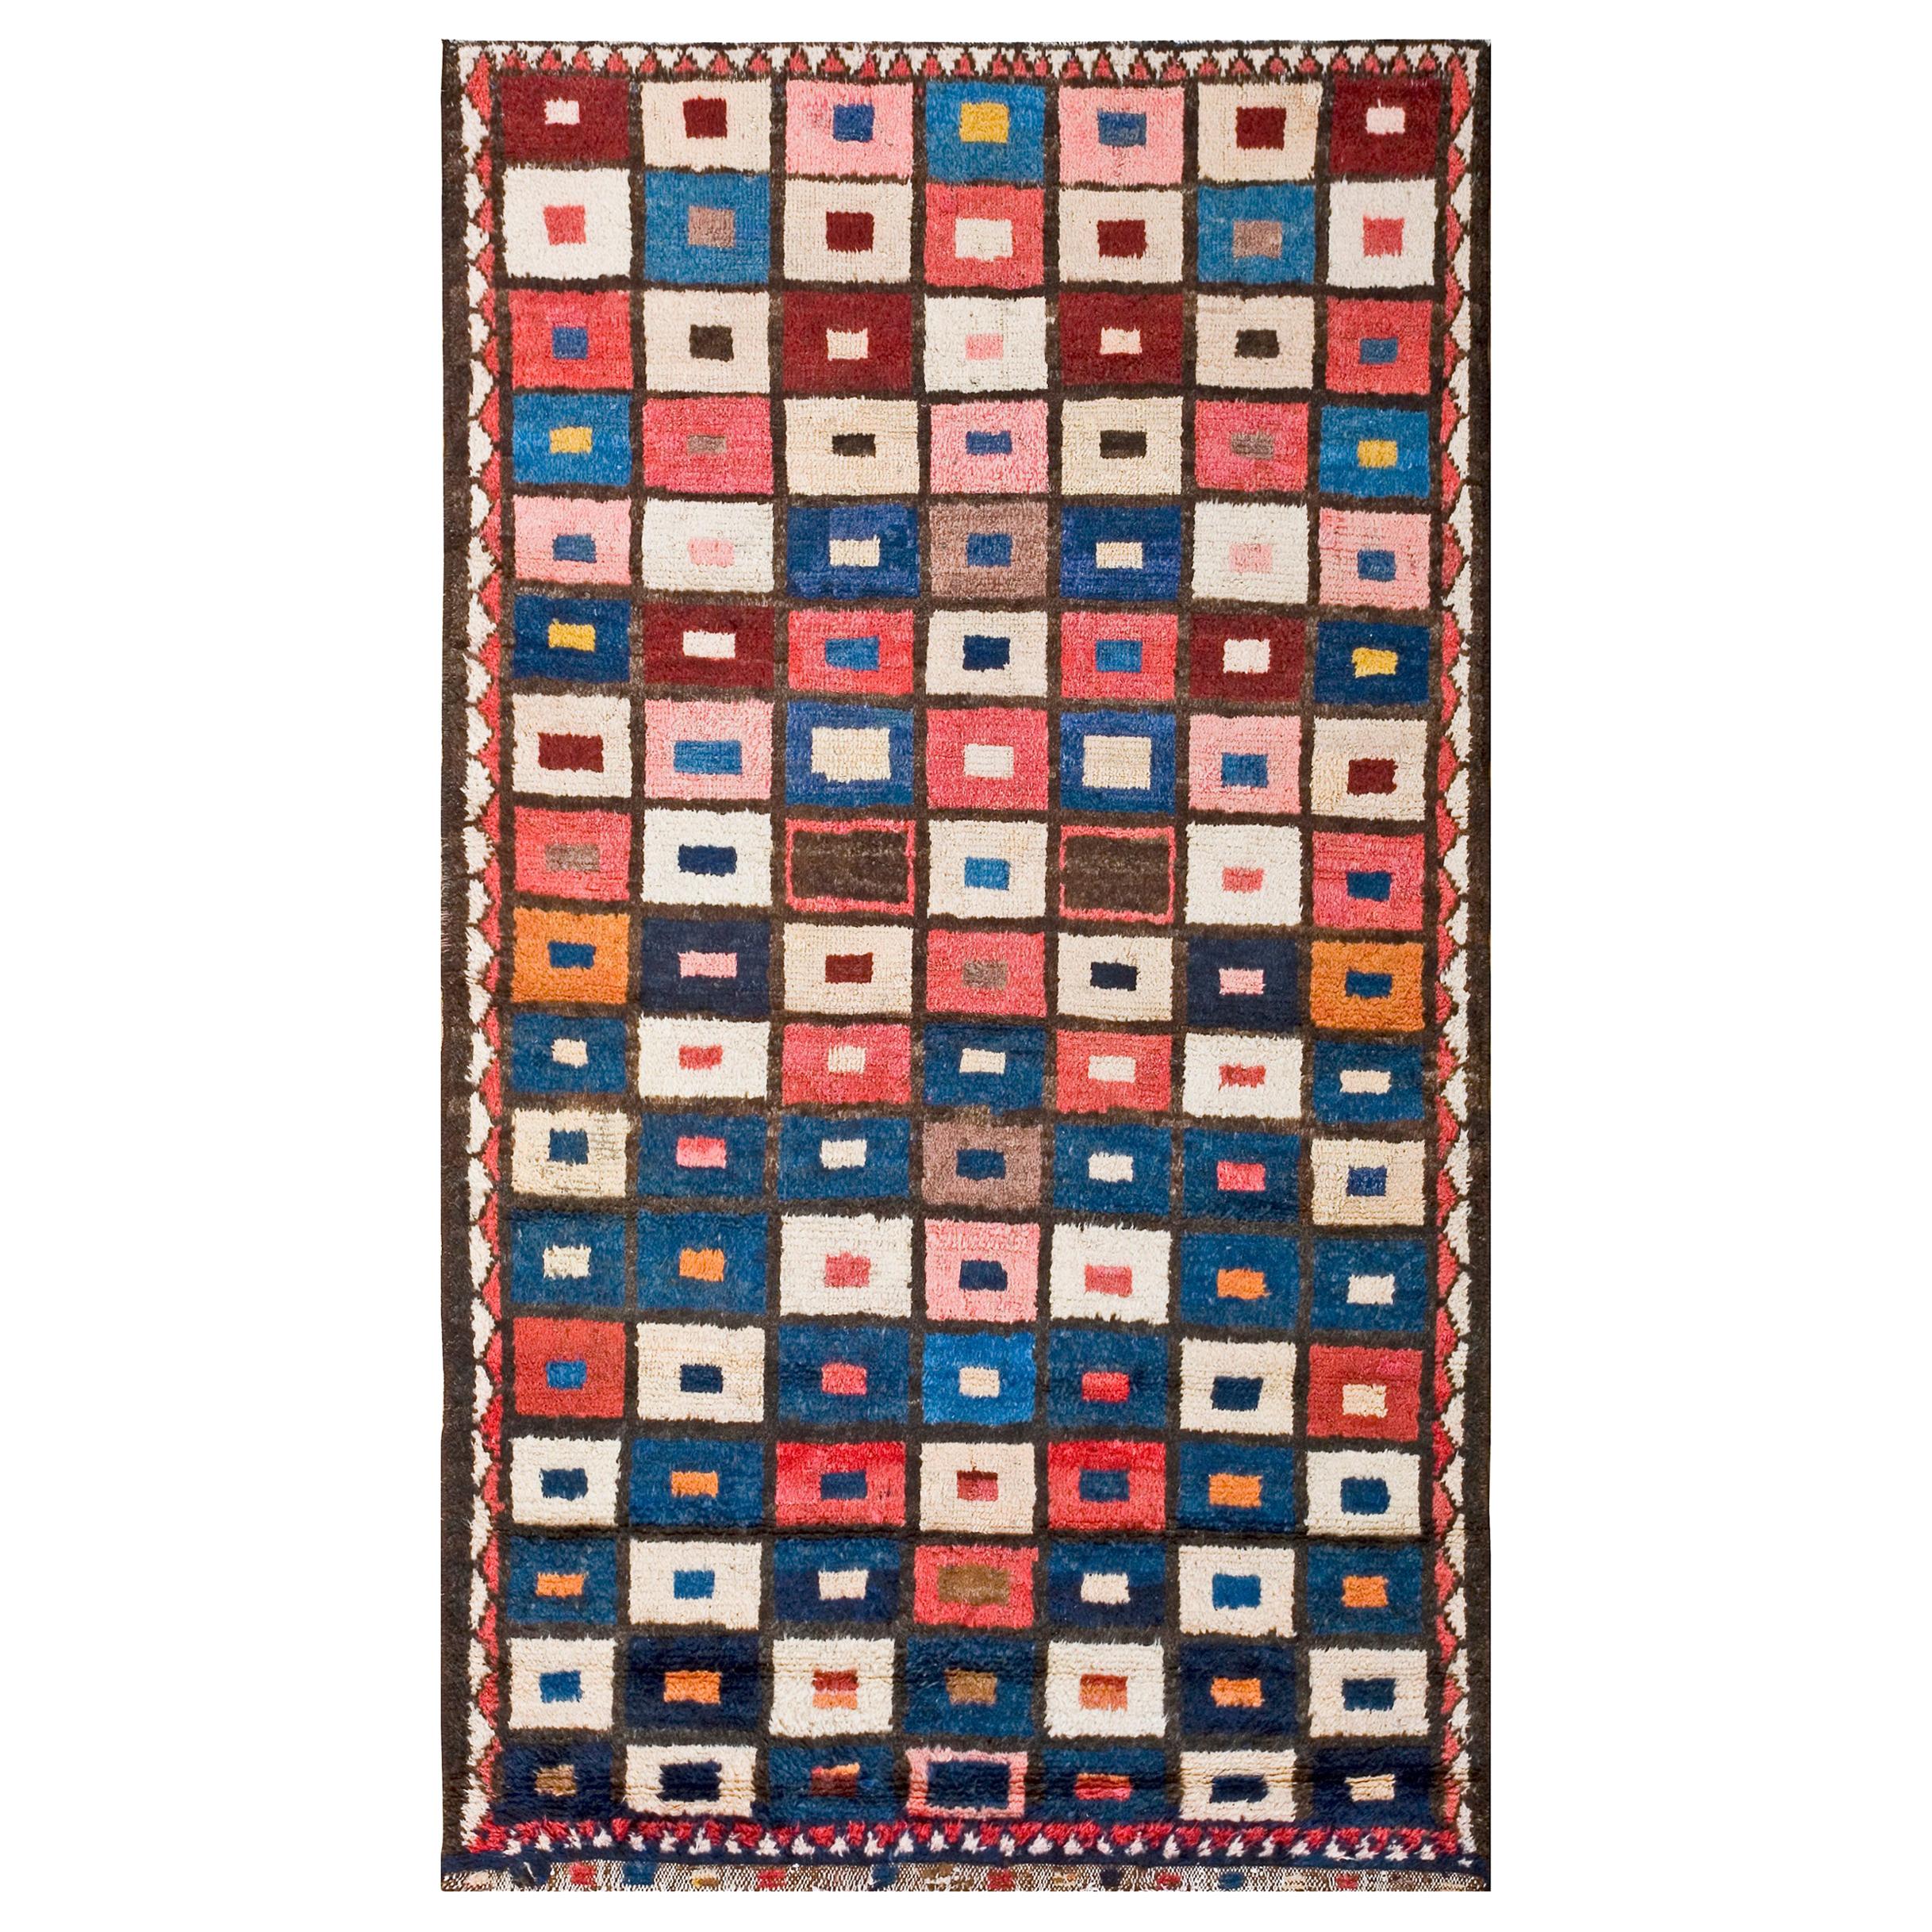 Early 20th Century S. Persian Gabbeh Rug ( 3'9" x 6'10" - 115 x 208 ) For Sale